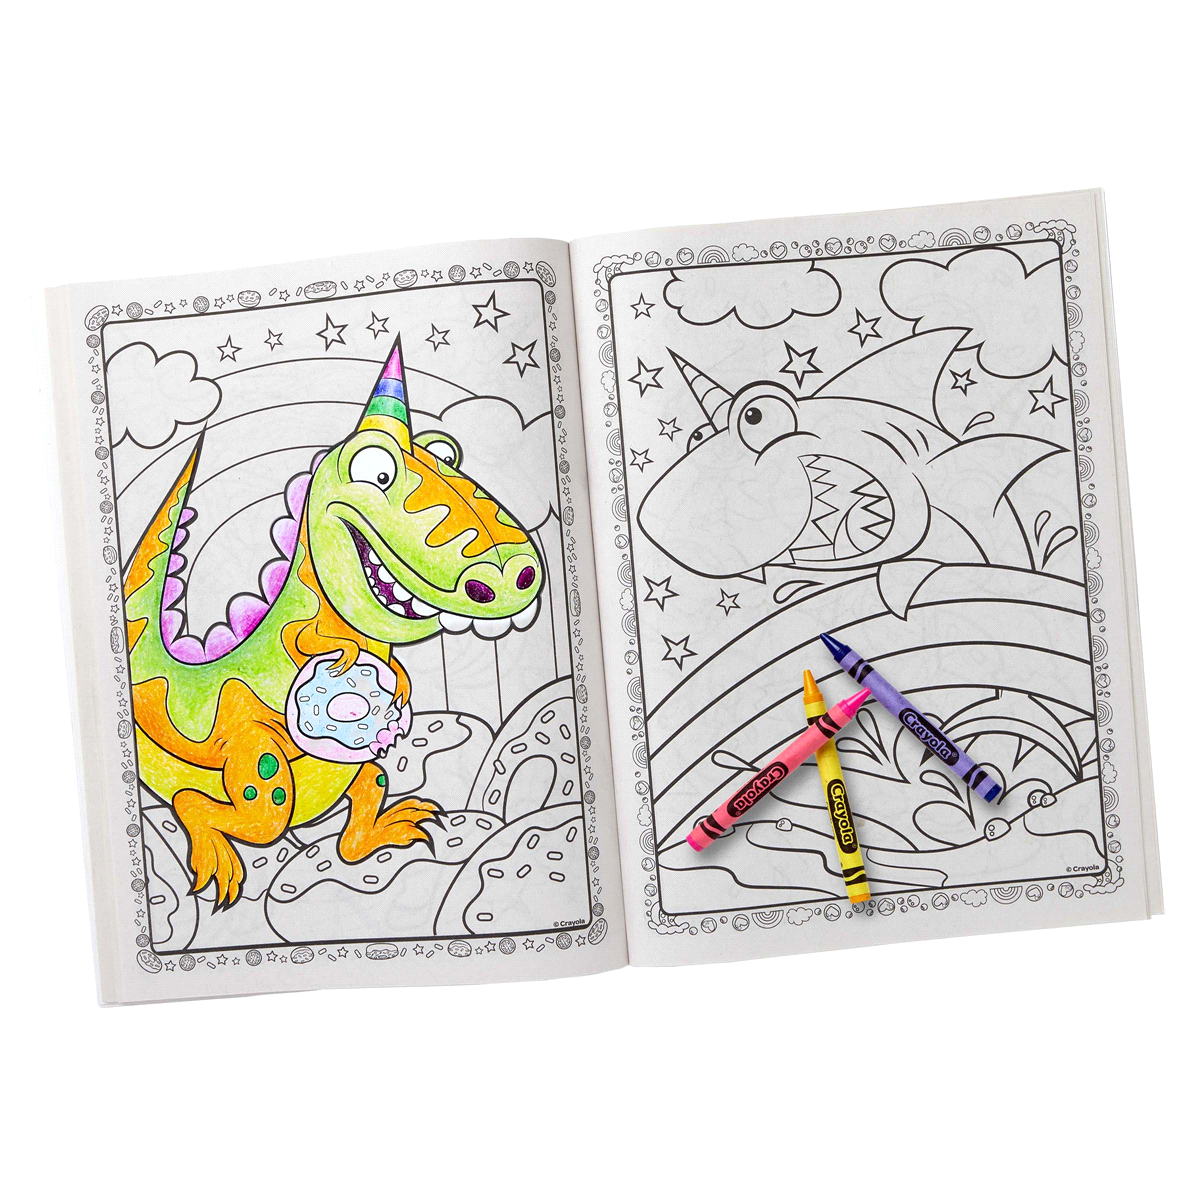 crayola-uni-creatures-coloring-book-64-coloring-pages-featuring-unicorns-and-other-one-horned